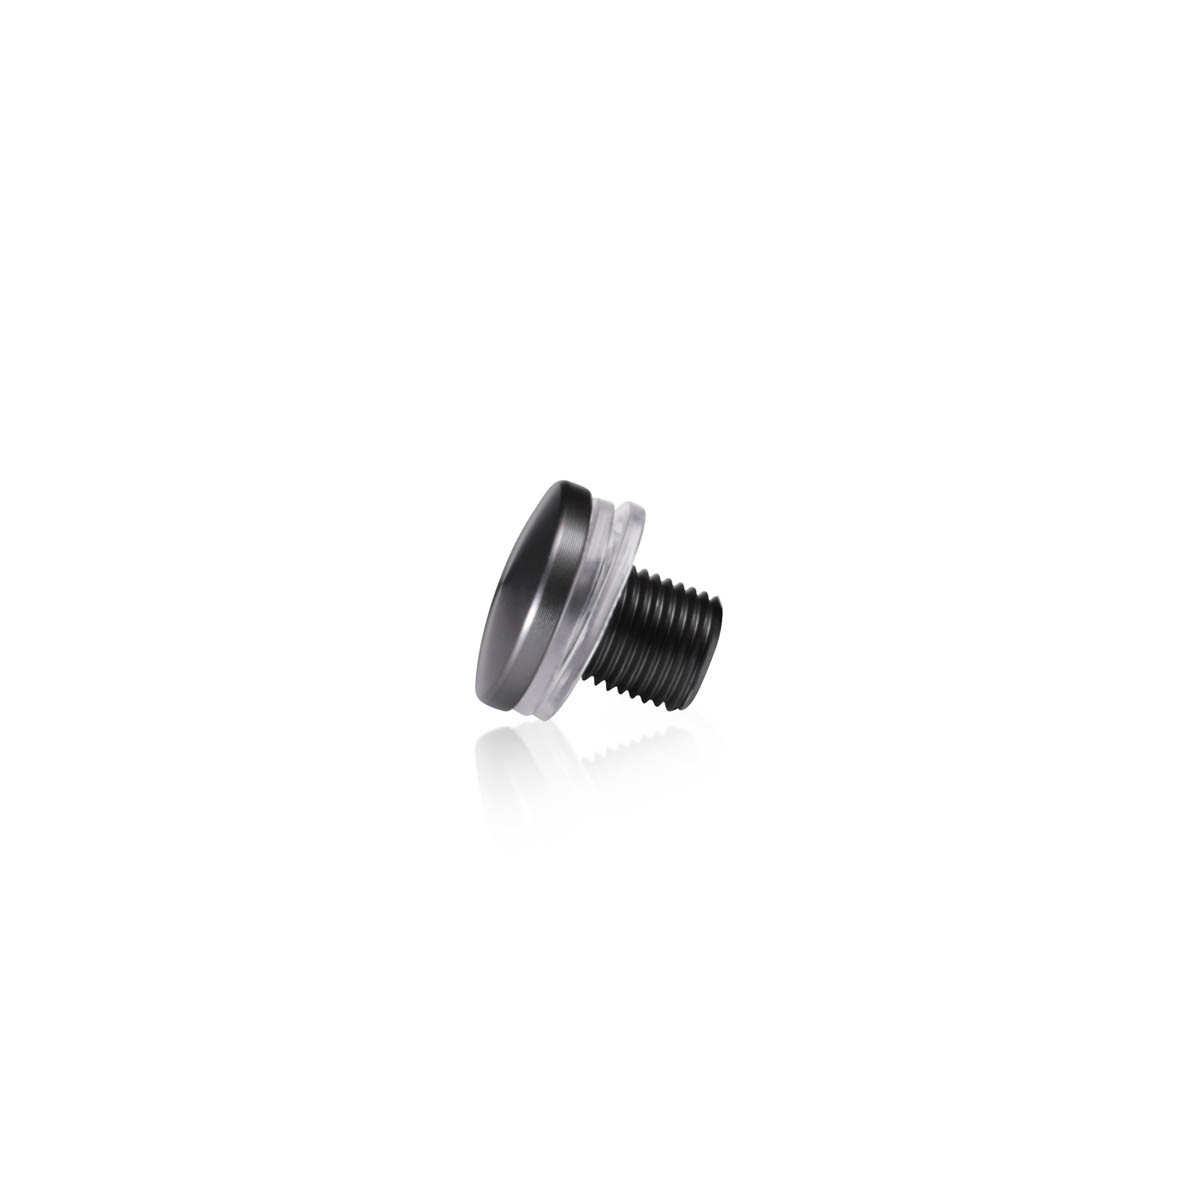 AL19-12T Head replacement for Mbs-Standoffs 3/4'' Diameter x 1/2'' Barrel Length, Aluminum Titanium Anodized Finish Standoffs (Includes 2 Silicone Washers).